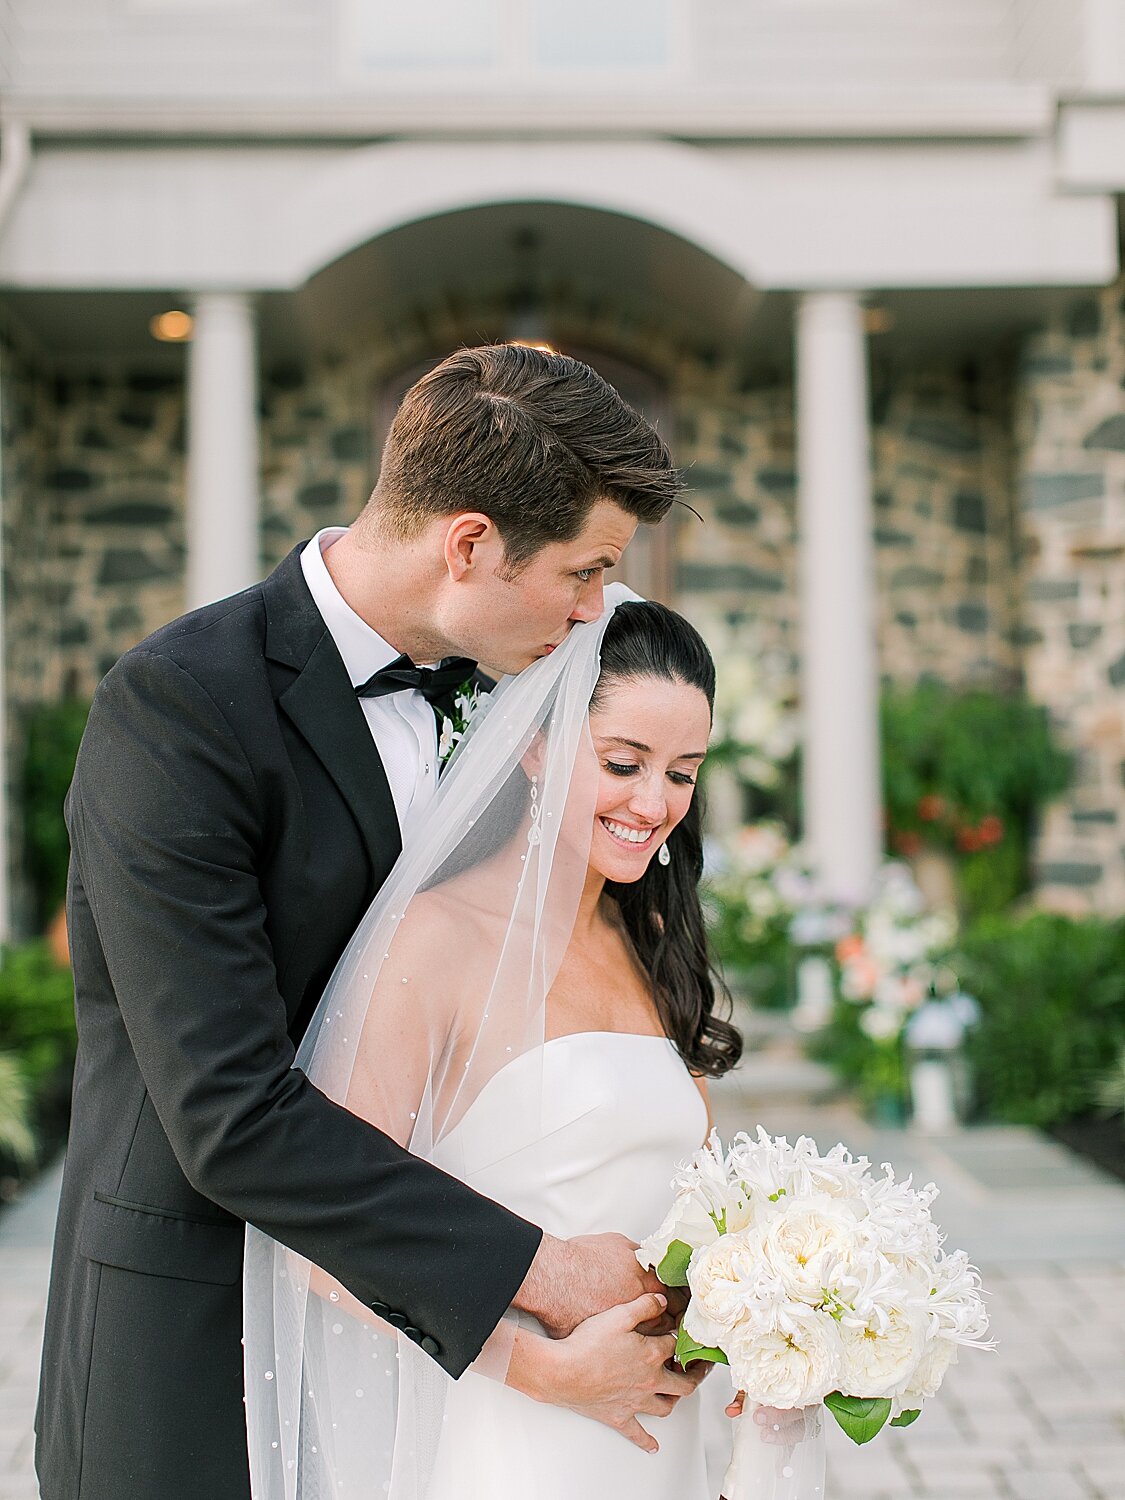 groom kisses bride's forehead during photos after NY wedding | Stylish Private Home Wedding Inspiration | Asher Gardner Photography